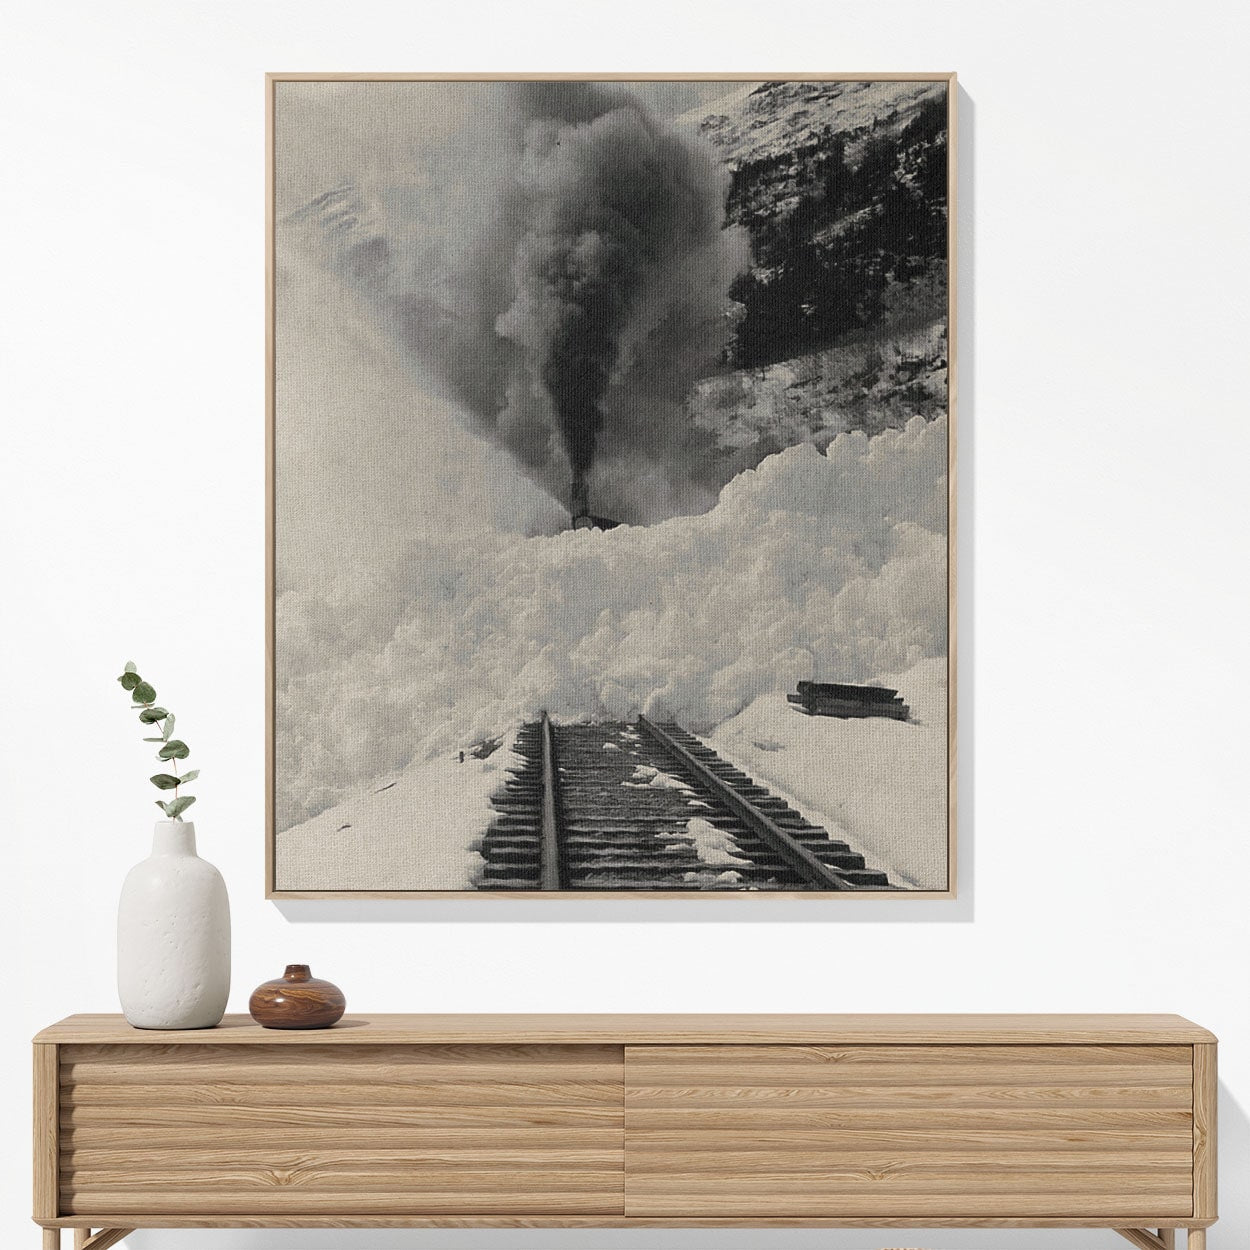 Snow Train Woven Blanket Woven Blanket Hanging on a Wall as Framed Wall Art